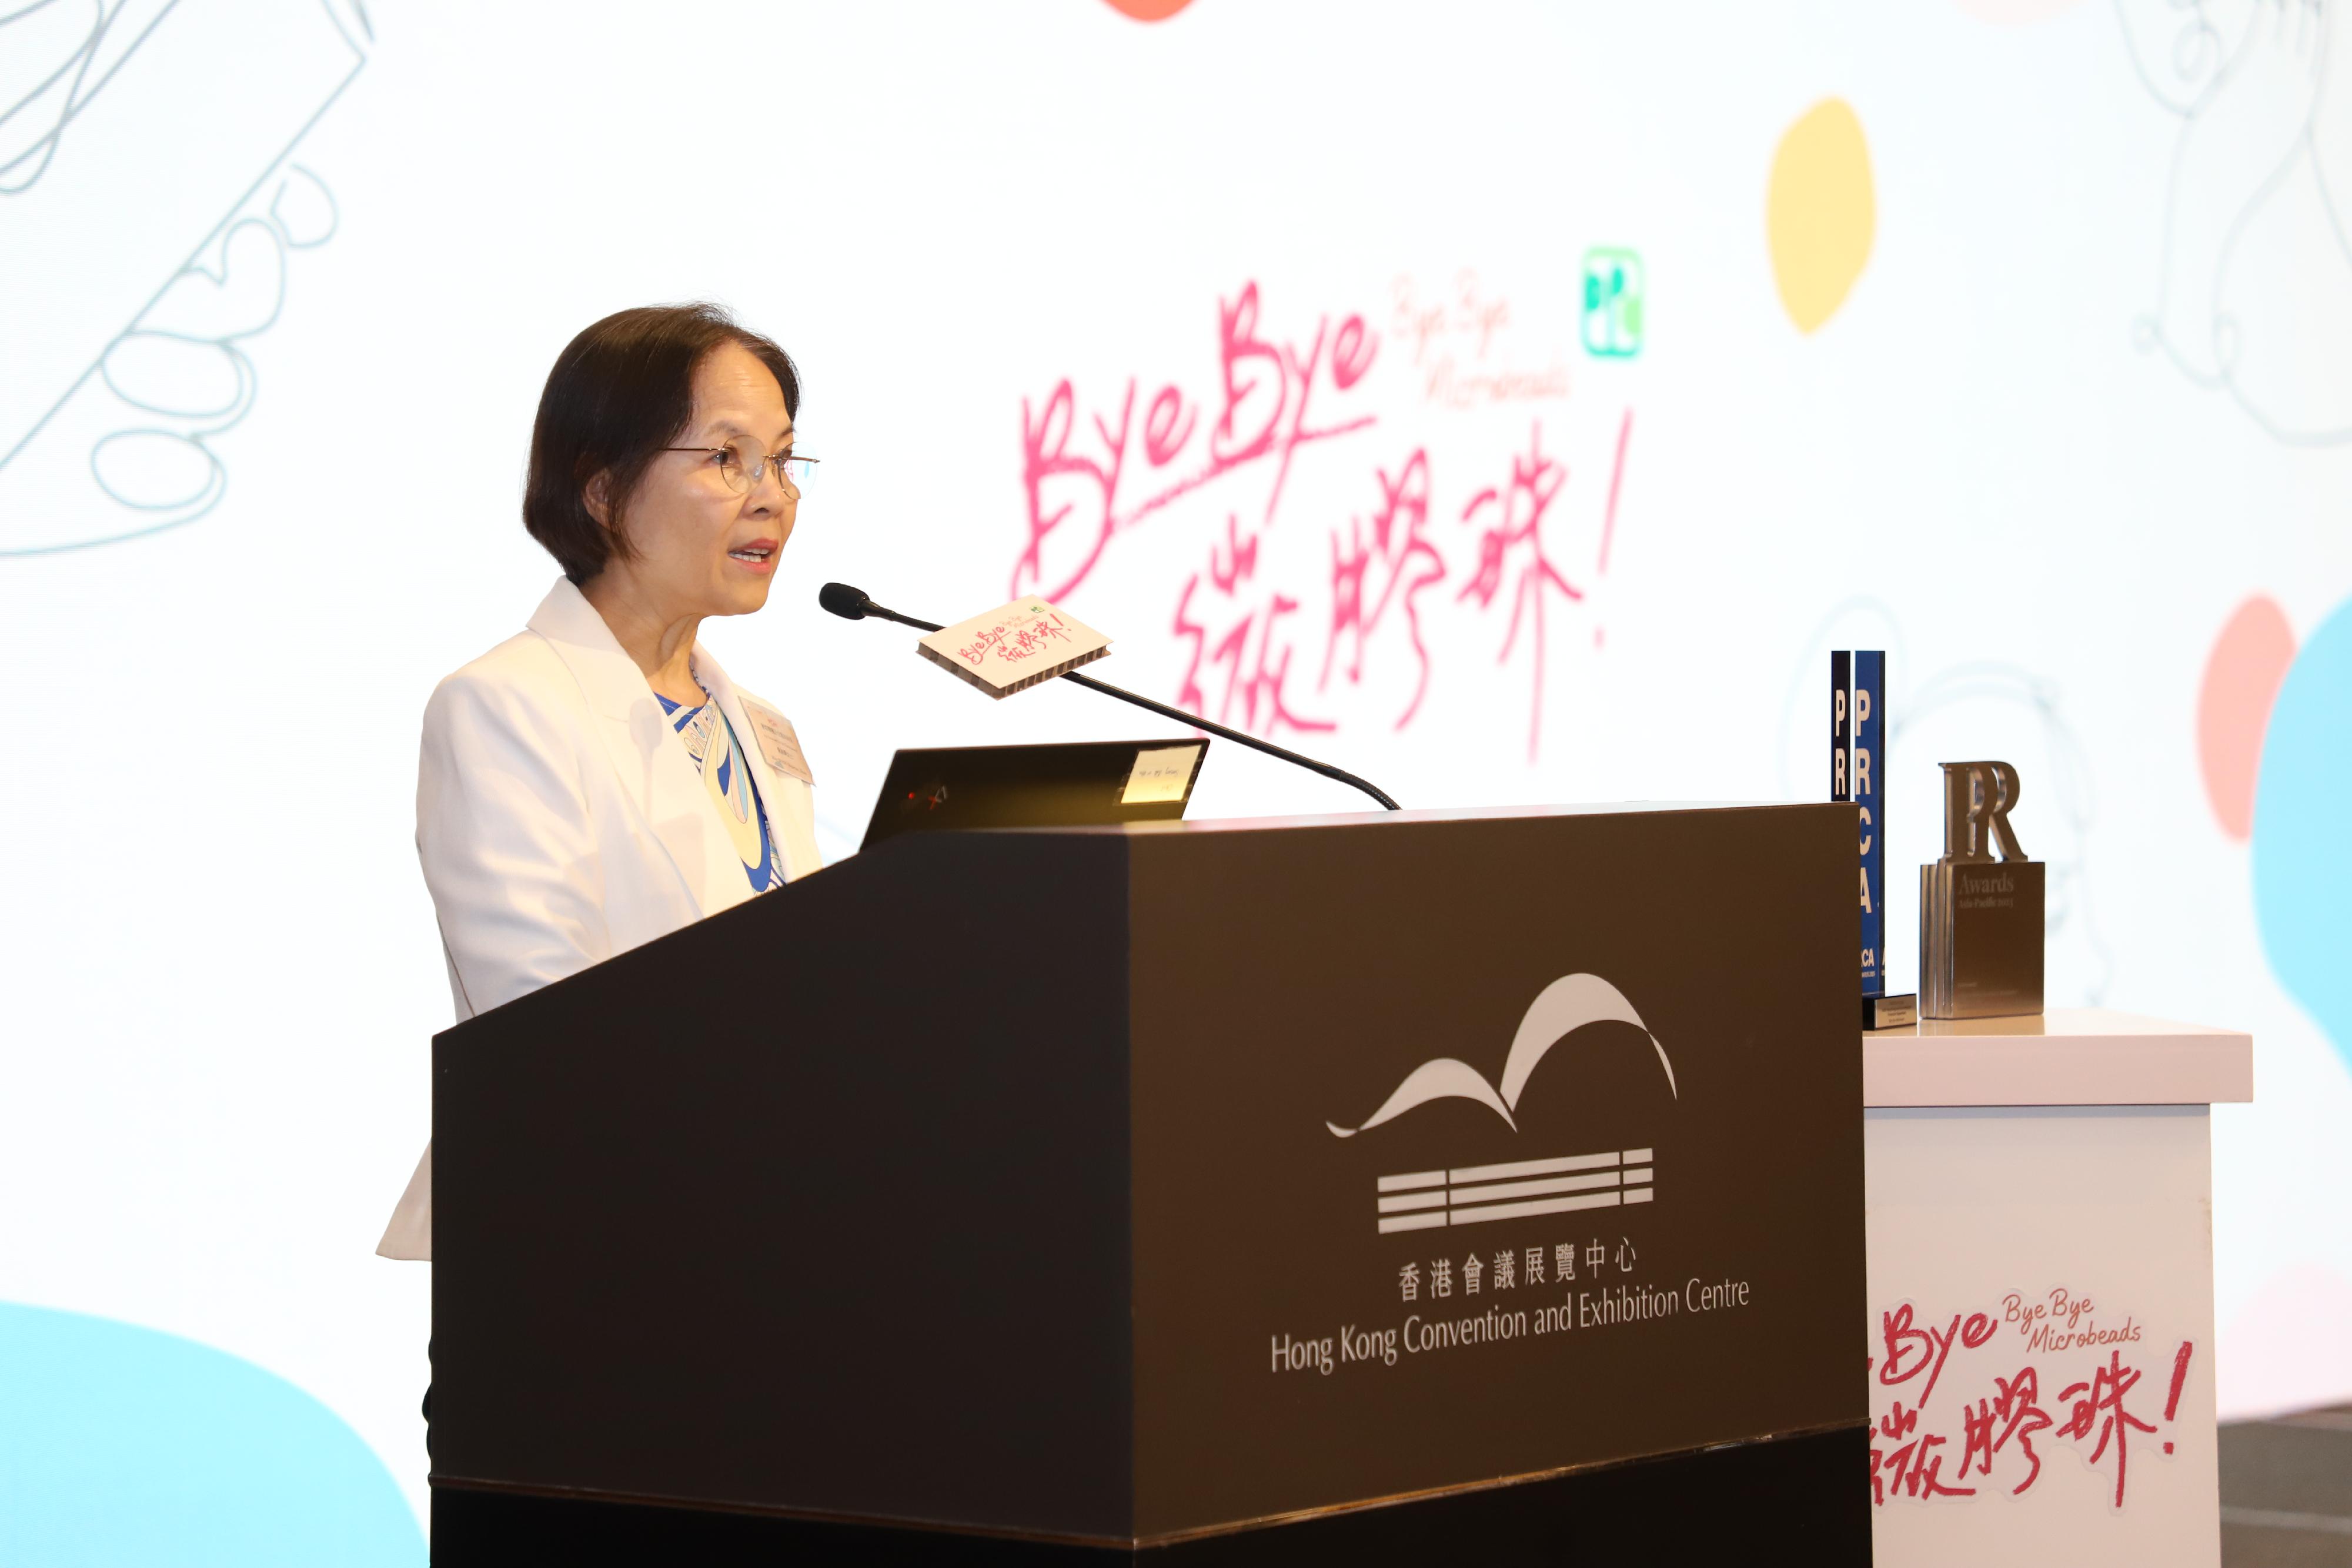 Speaking at the award ceremony for the Bye Bye Microbeads charter today (August 8), the Acting Secretary for the Environment and Ecology, Miss Diane Wong, called on the trade and the public to continue their journey of Bye Bye Microbeads to completely eliminate the impact of microbeads on the environment and ecology.